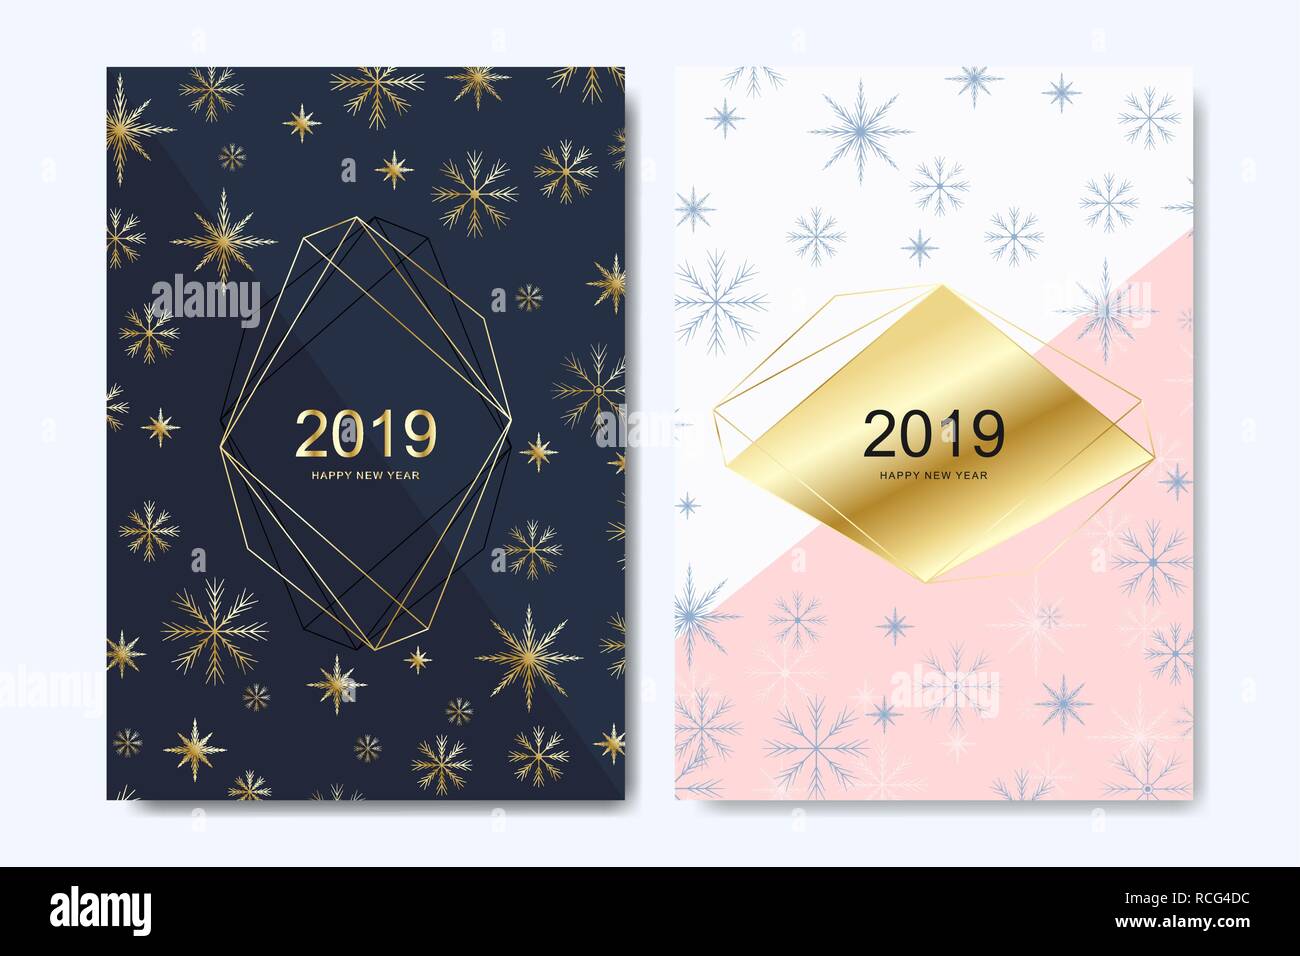 New Year greeting card design with with golden snowflakes. Holiday greeting card template Happy New Year 2019 for posters, placards, banners and flyers. Vector illustration. Stock Vector